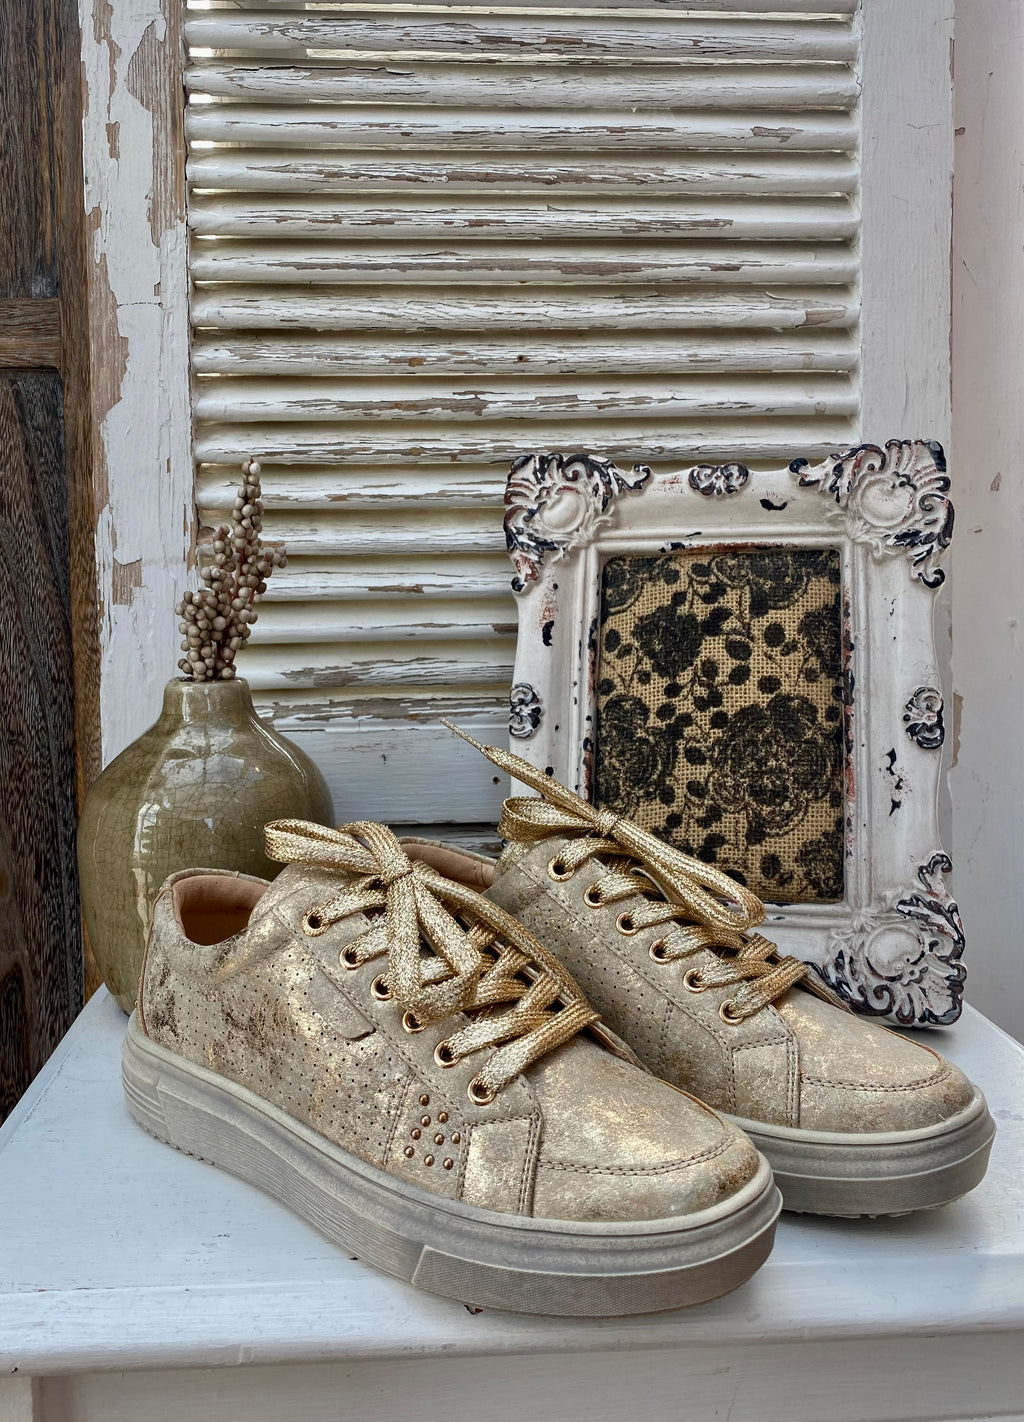 Down Time Gold Metallic Corky Shoes - Catching Fireflies Boutique